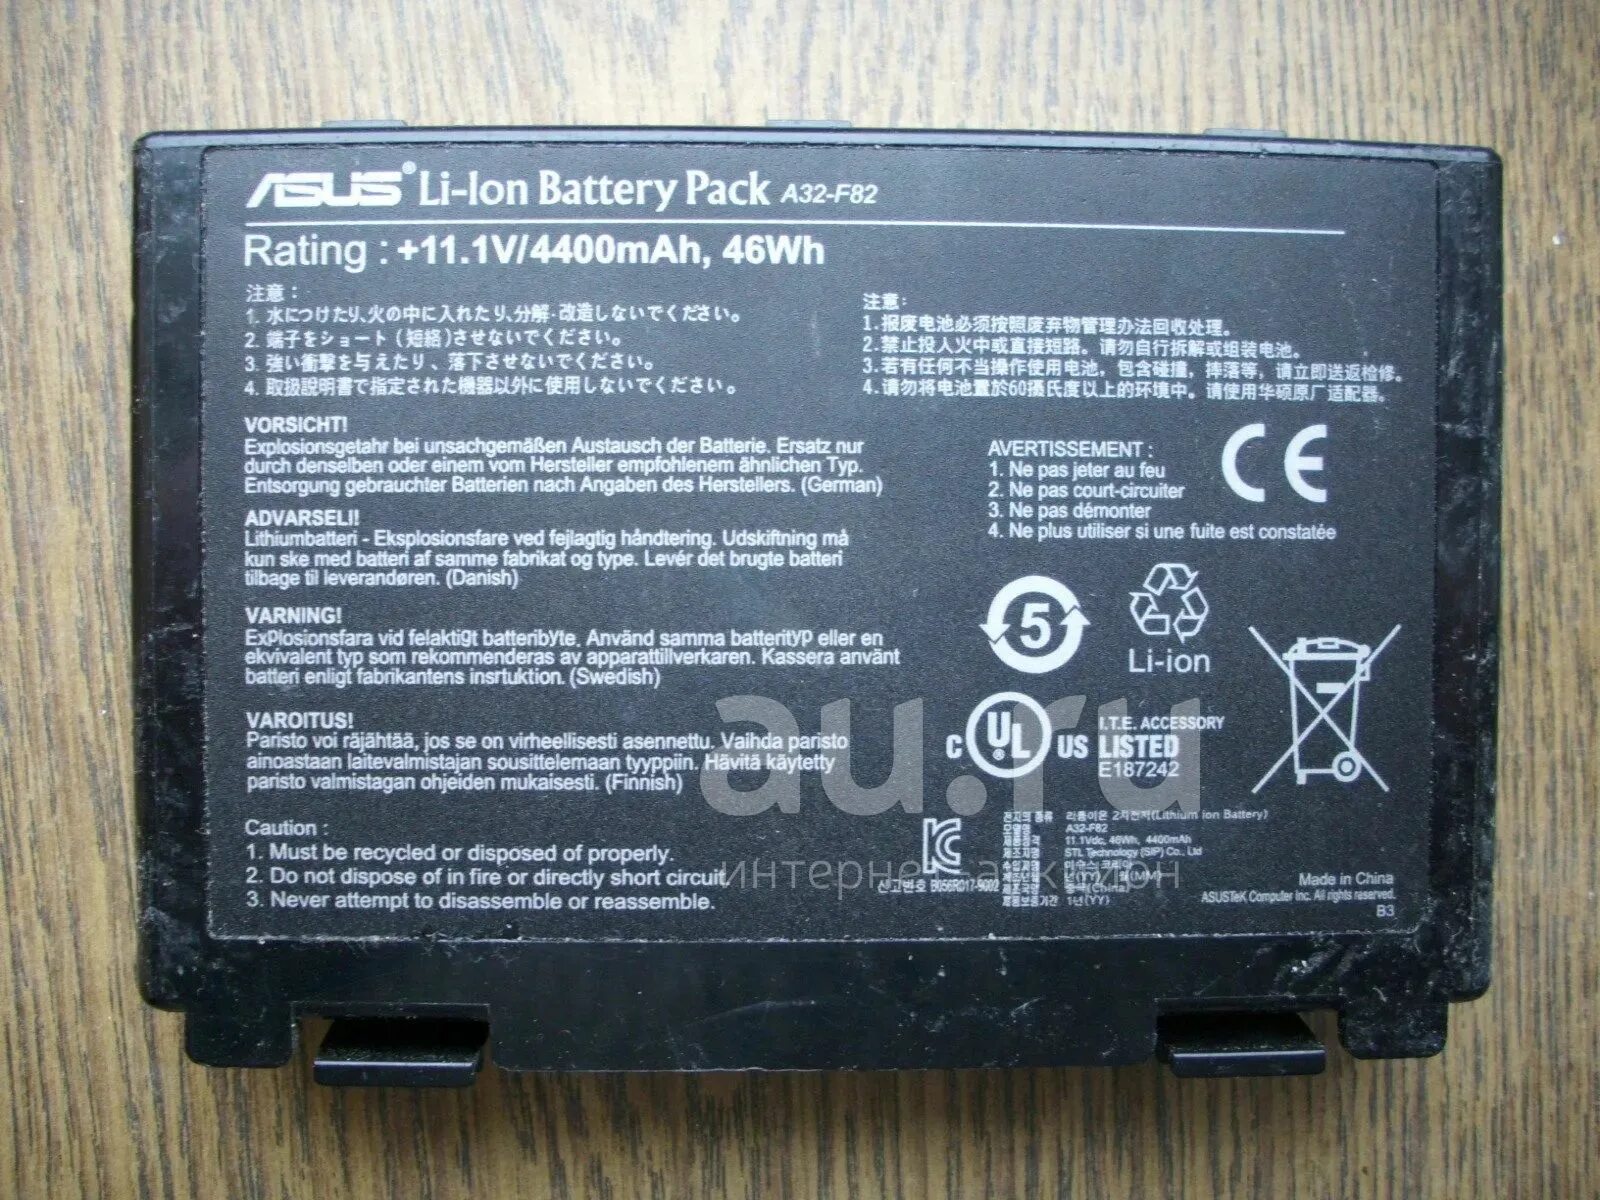 Аккумулятор ASUS a32-f82. ASUS li-ion Battery Pack a32-f82 Protection Board. A32-f82 полярность. Аккумулятор ASUS a32-f82 схема.